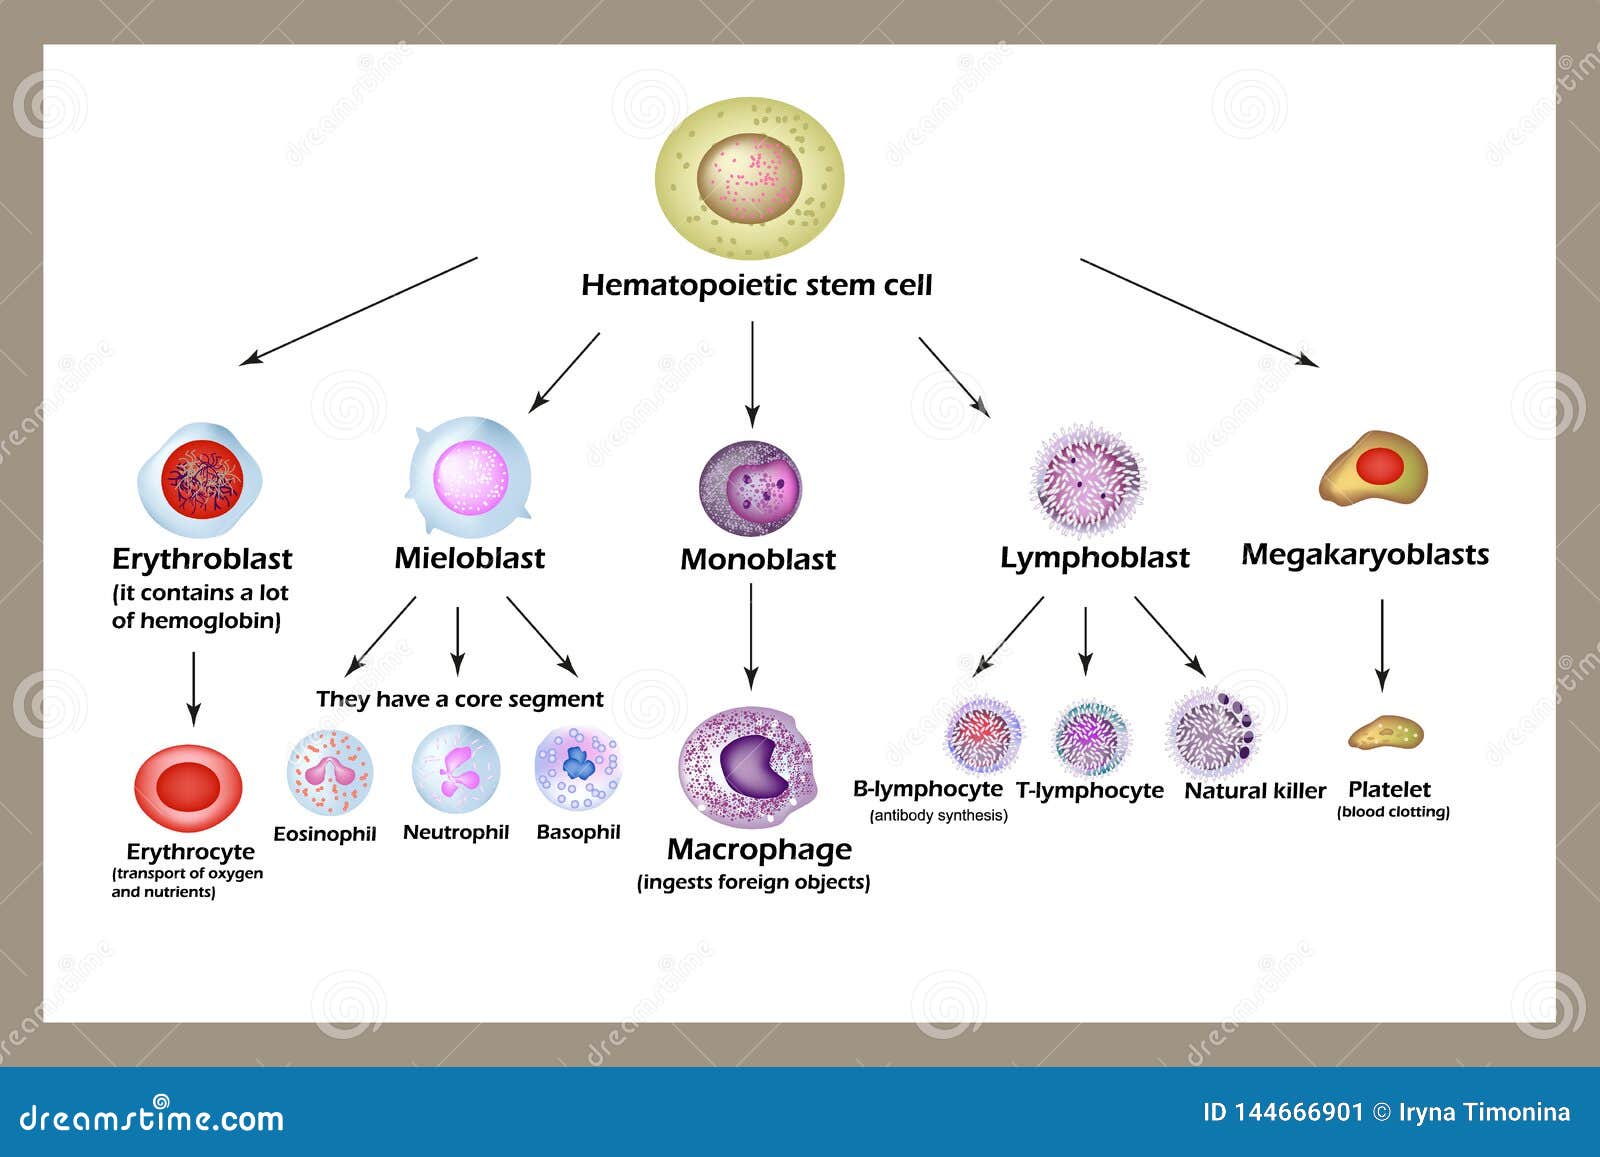 Red Blood Cell Development Stages